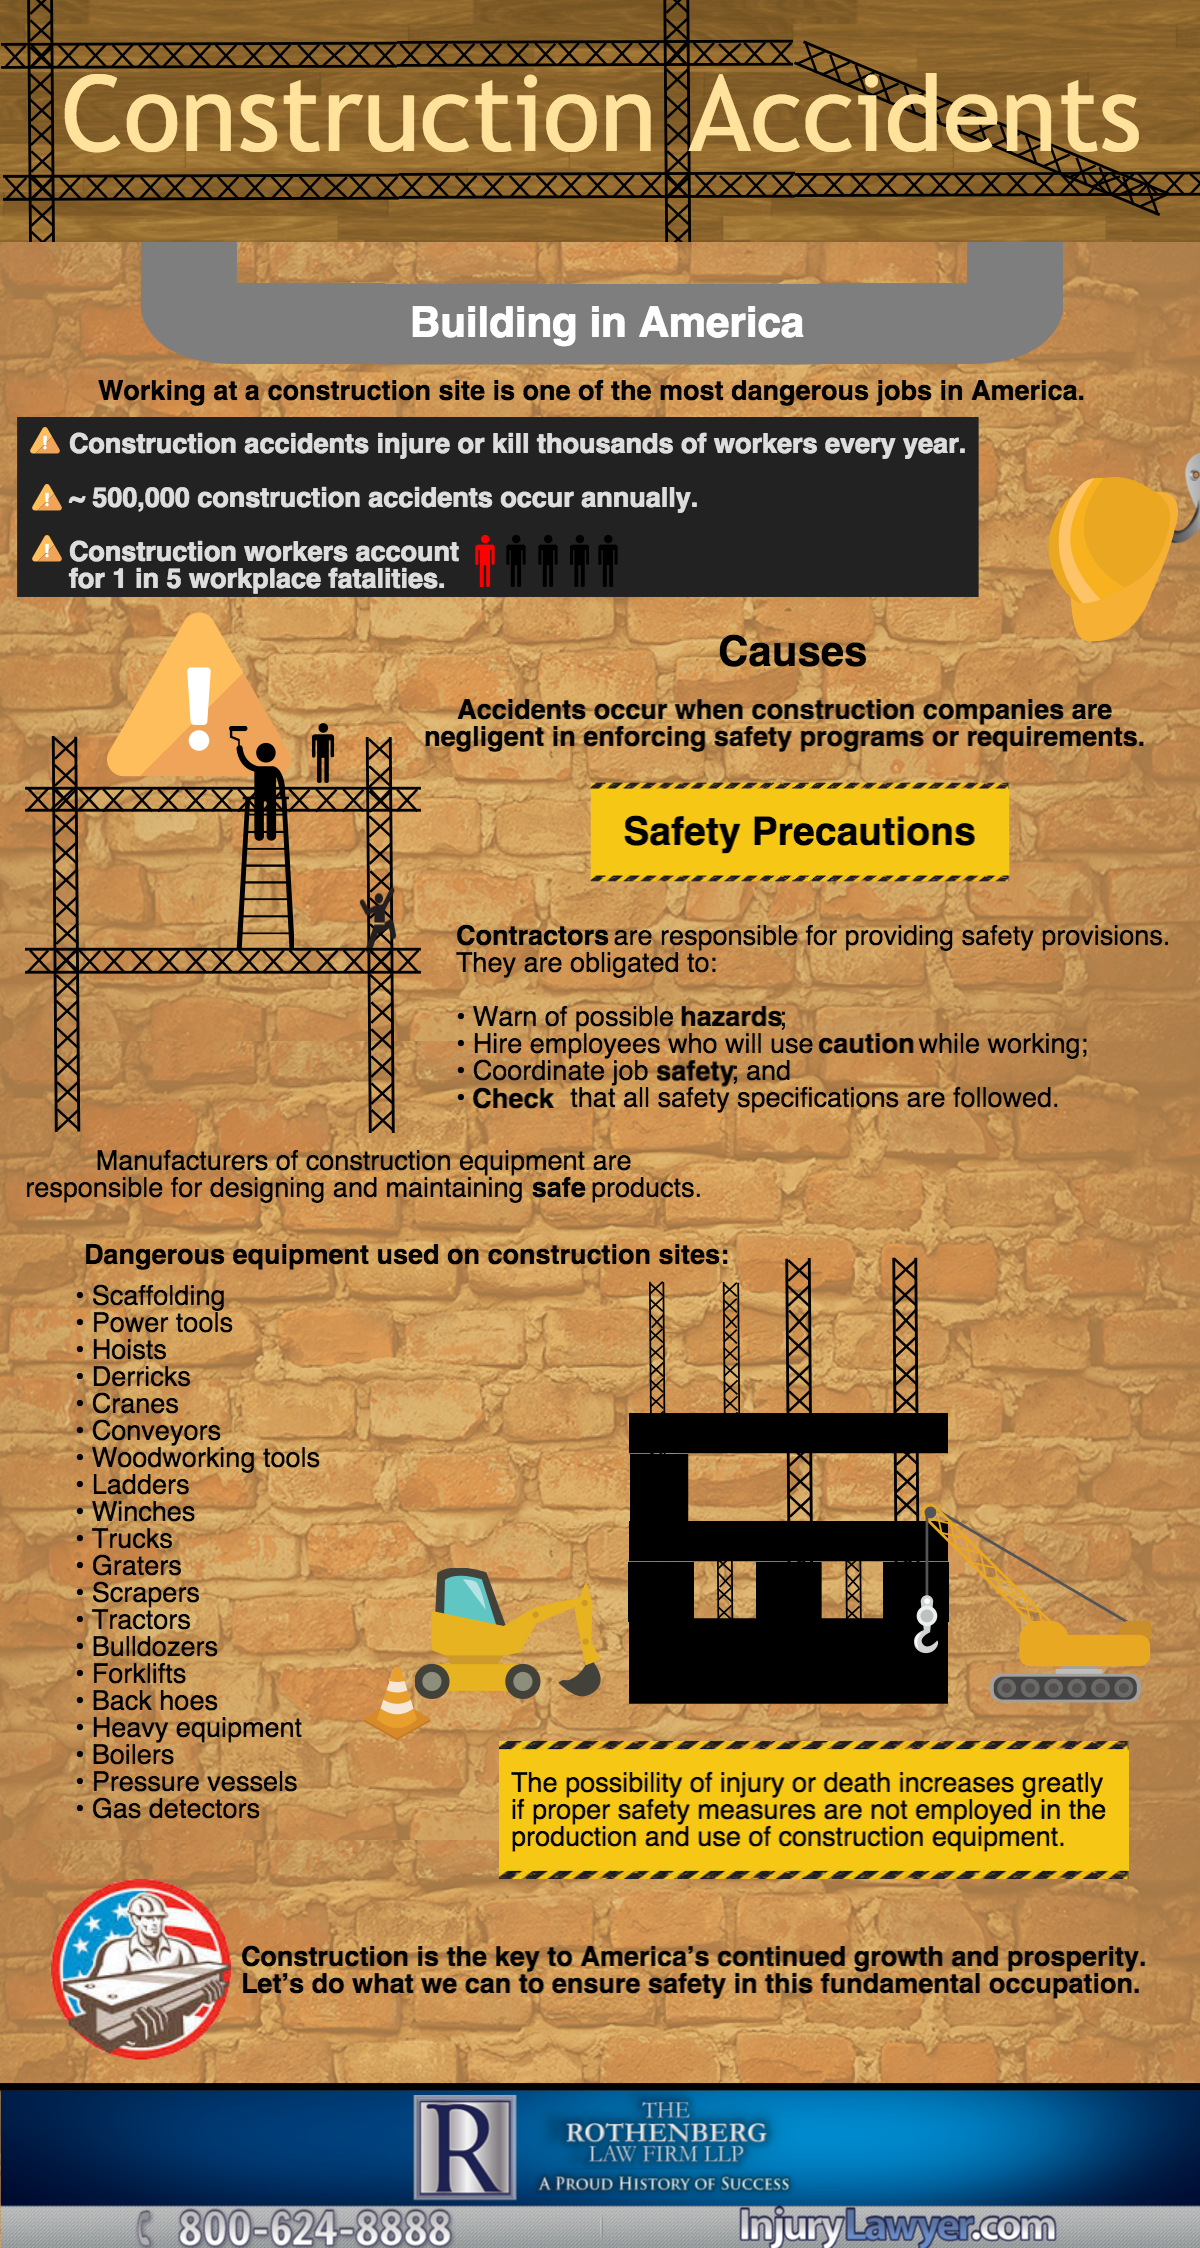 Construction Accidents Infographic